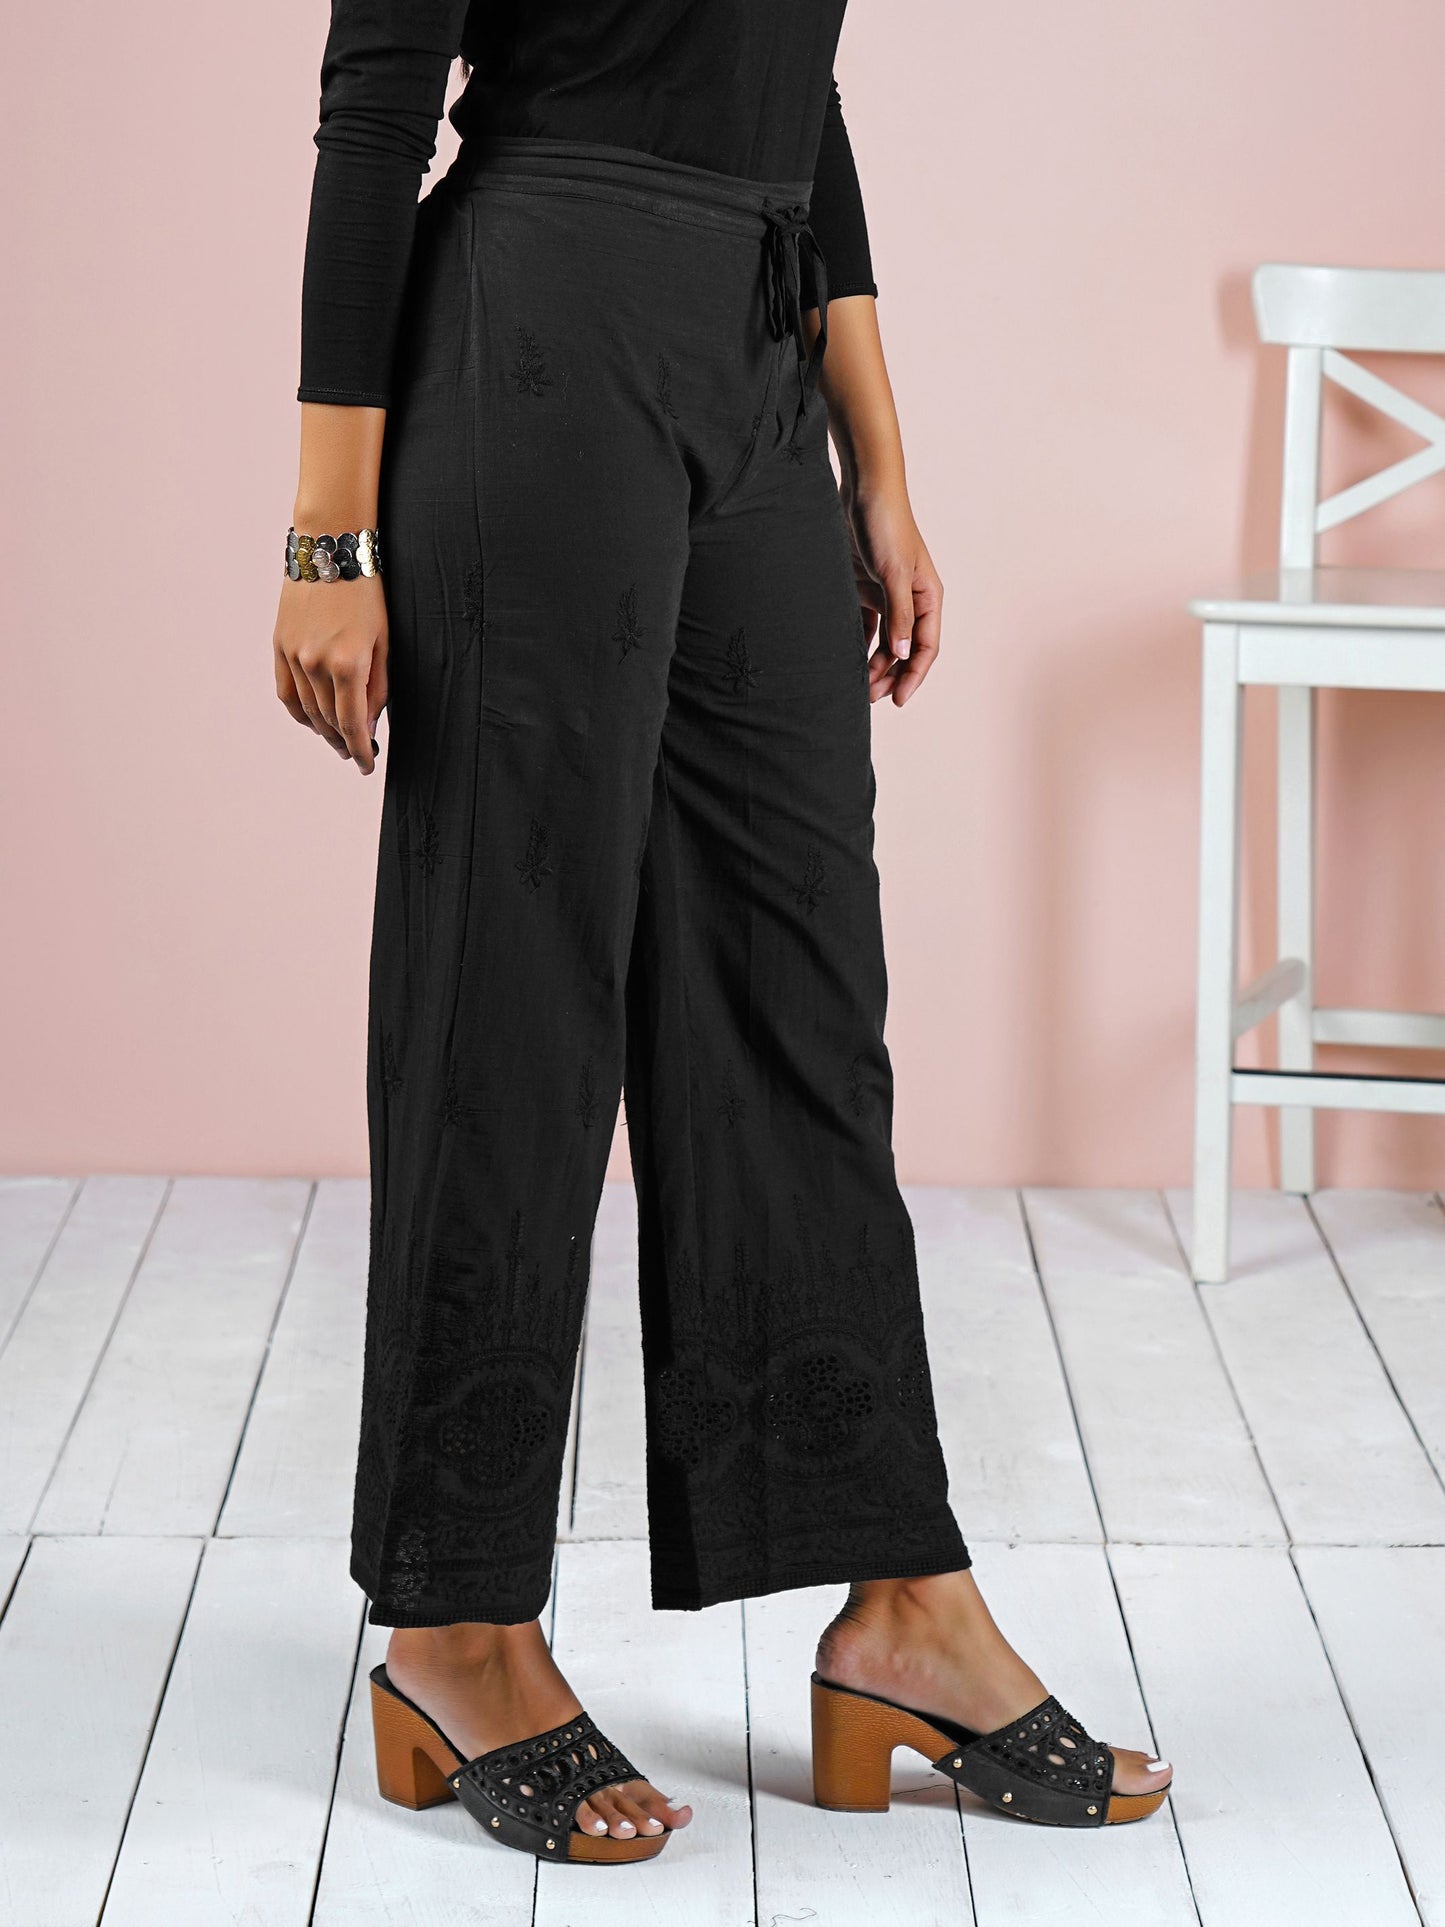 Floral Embroidered Schiffli Palazzo Pants - Black